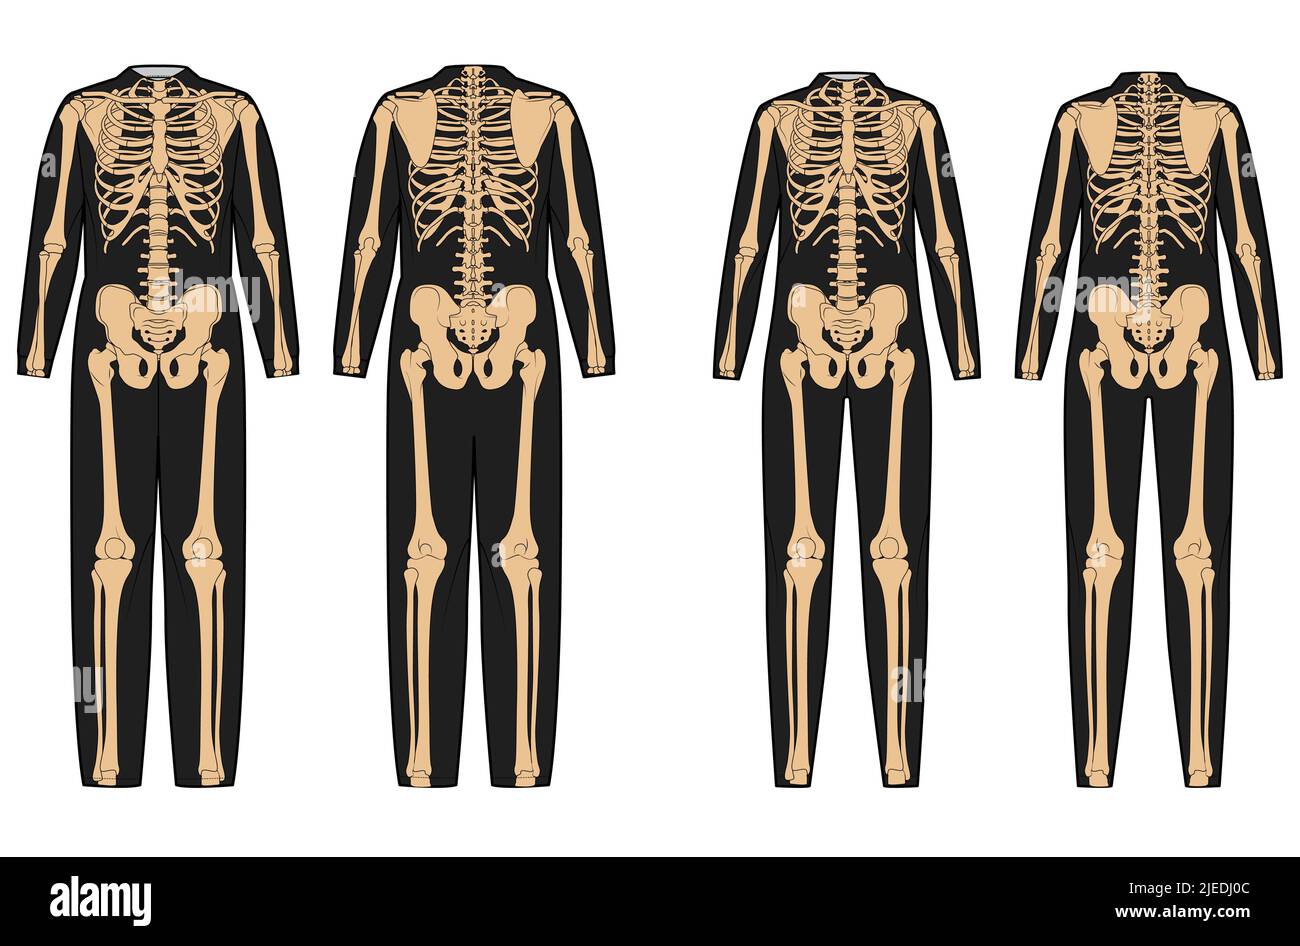 Set of Skeleton costume Human bones on bodysuit front back view men women for Halloween, festivals, printing on clothes for Day of the dead flat black beige color concept Vector illustration isolated Stock Vector